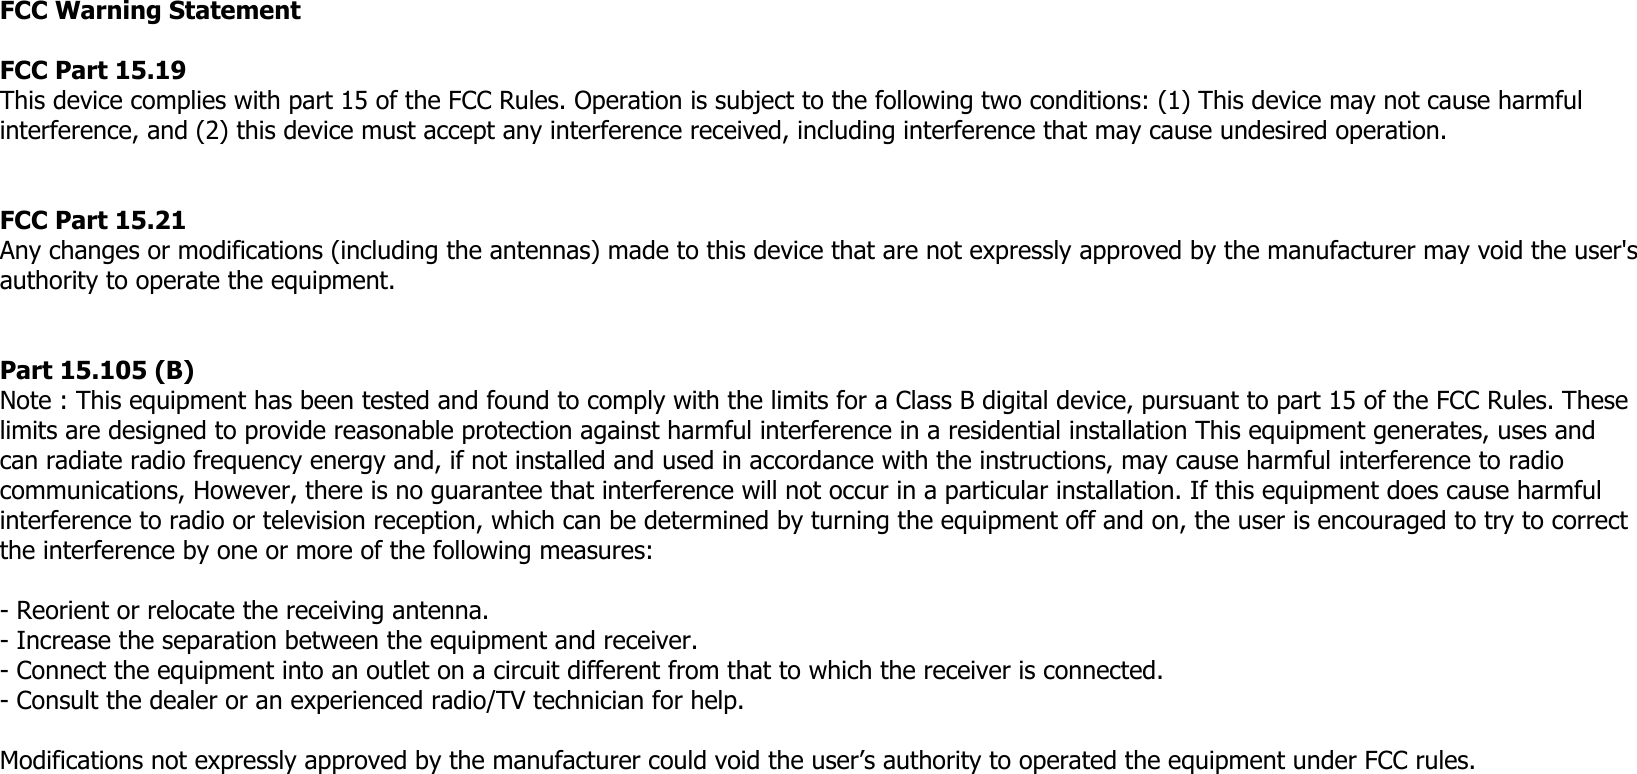 FCC Warning StatementFCC Part 15.19 This device complies with part 15 of the FCC Rules. Operation is subject to the following two conditions: (1) This device may not cause harmful interference, and (2) this device must accept any interference received, including interference that may cause undesired operation.FCC Part 15.21 Any changes or modifications (including the antennas) made to this device that are not expressly approved by the manufacturer may void the user&apos;s authority to operate the equipment.Part 15.105 (B)Note : This equipment has been tested and found to comply with the limits for a Class B digital device, pursuant to part 15 of the FCC Rules. These limits are designed to provide reasonable protection against harmful interference in a residential installation This equipment generates, uses and can radiate radio frequency energy and, if not installed and used in accordance with the instructions, may cause harmful interference to radio communications, However, there is no guarantee that interference will not occur in a particular installation. If this equipment does cause harmful interference to radio or television reception, which can be determined by turning the equipment off and on, the user is encouraged to try to correct the interference by one or more of the following measures: - Reorient or relocate the receiving antenna. - Increase the separation between the equipment and receiver. - Connect the equipment into an outlet on a circuit different from that to which the receiver is connected. - Consult the dealer or an experienced radio/TV technician for help.  Modifications not expressly approved by the manufacturer could void the user’s authority to operated the equipment under FCC rules.  